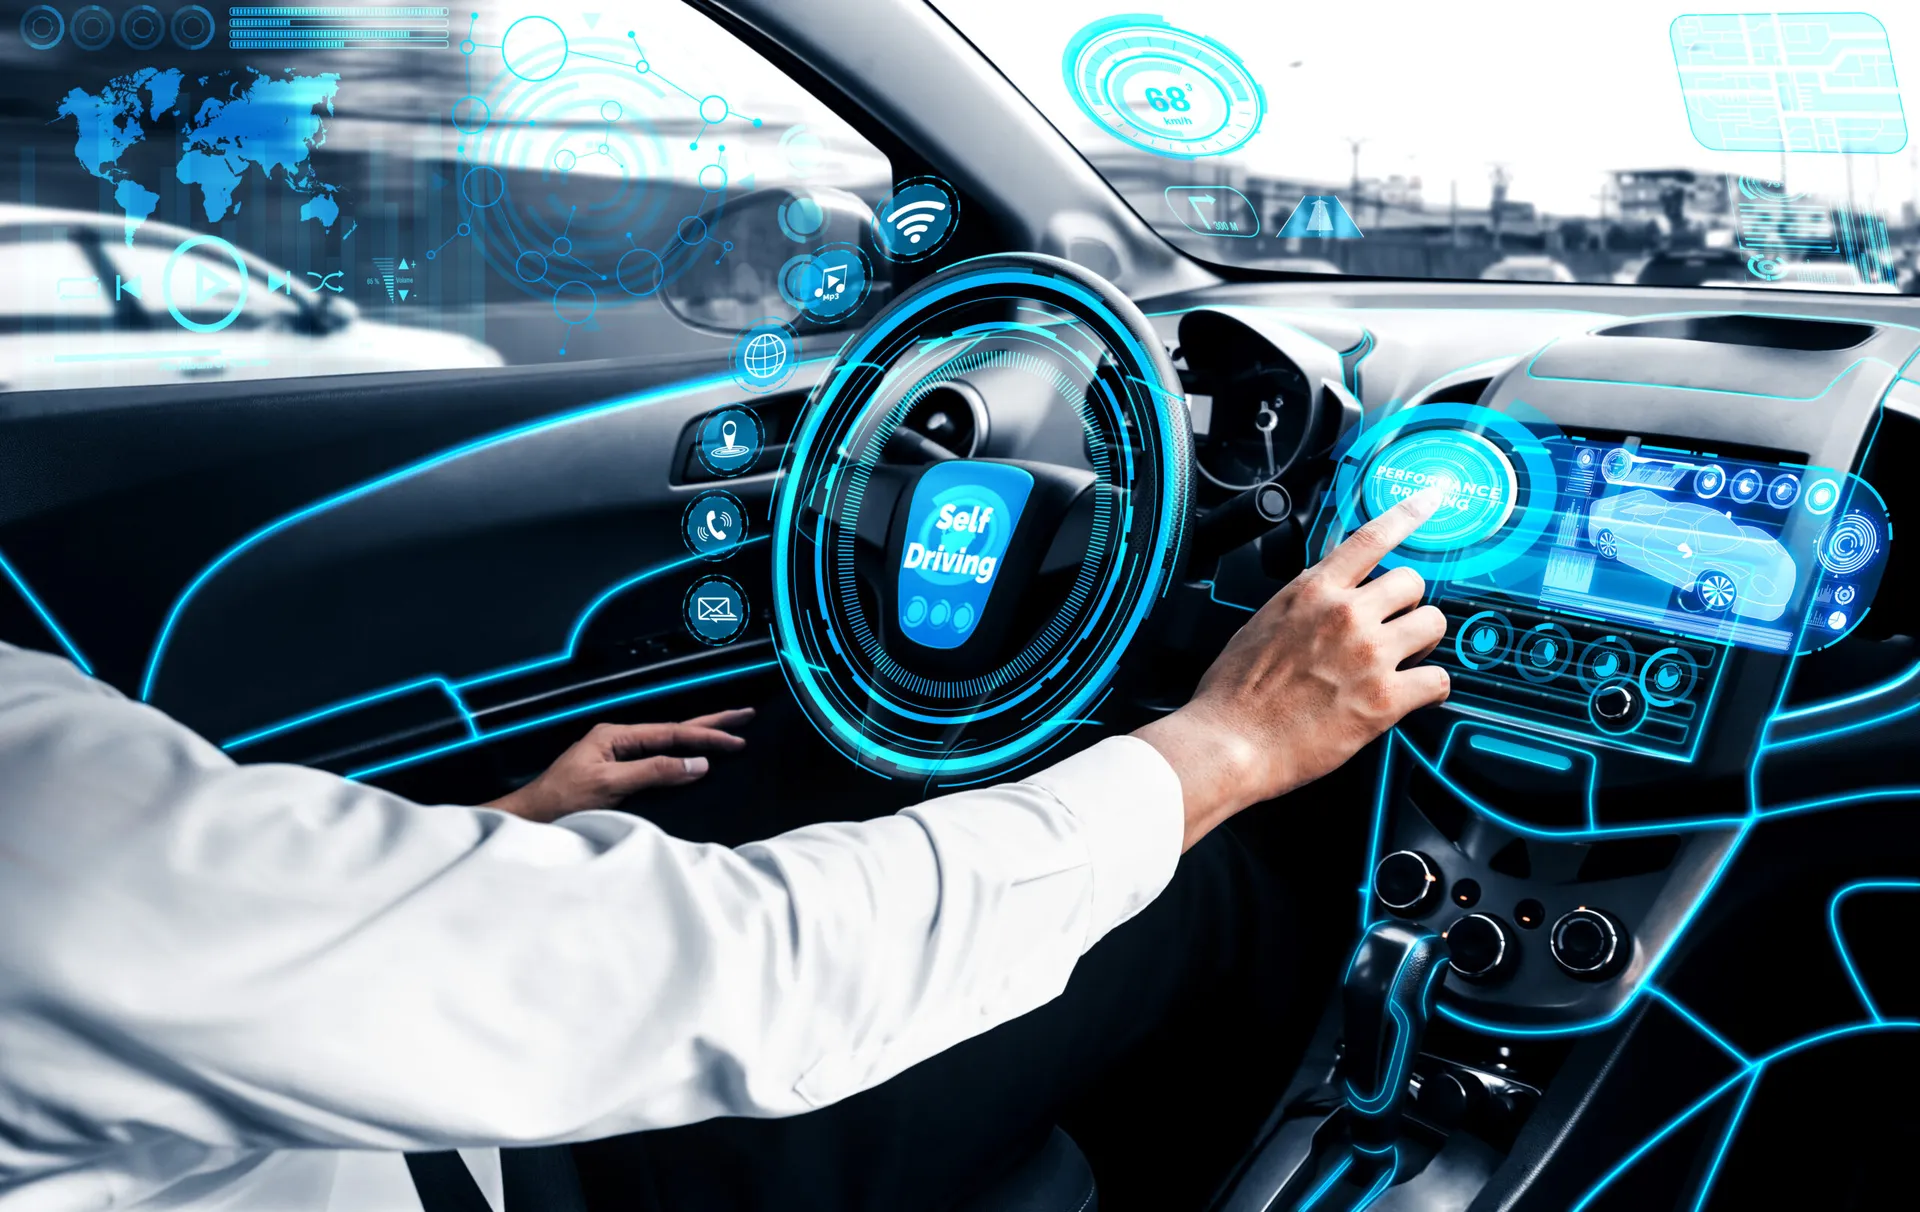 Security for connected cars